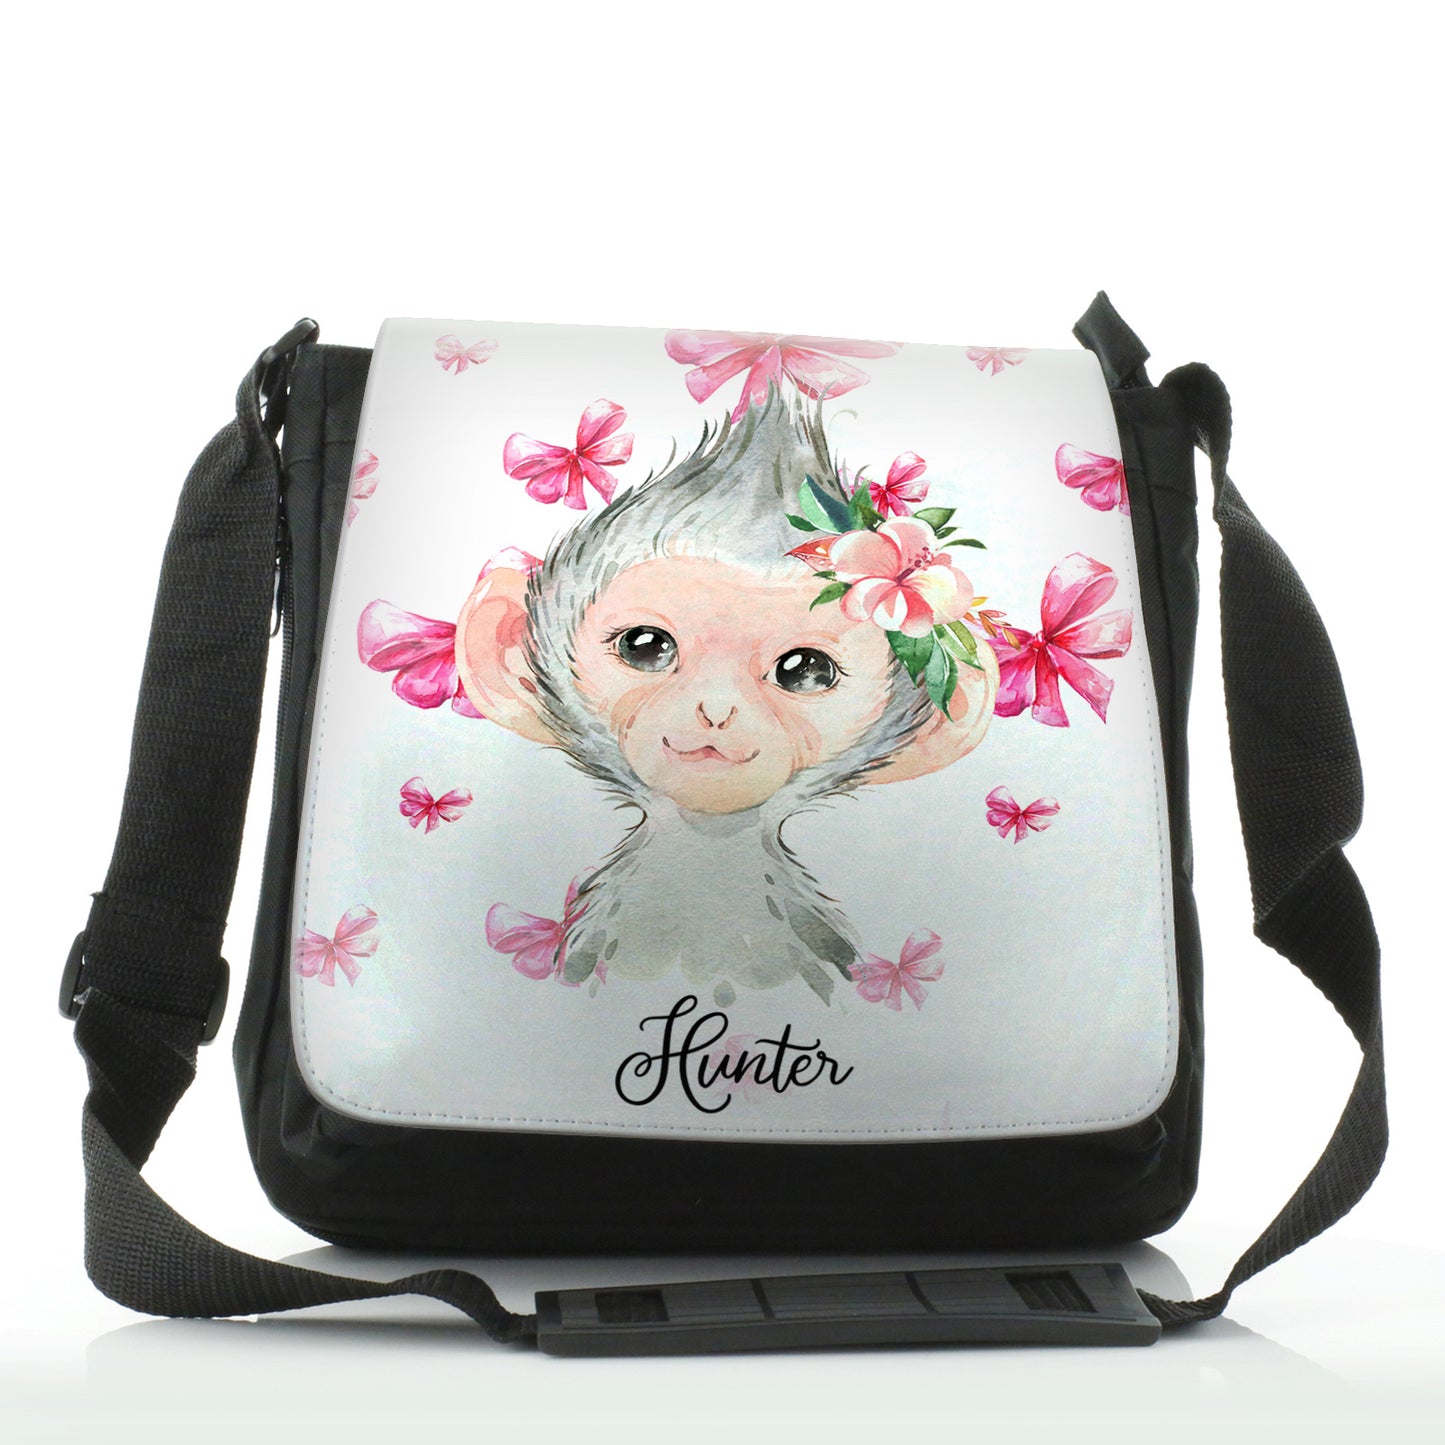 Personalised Shoulder Bag with Monkey Pink Bows and Cute Text